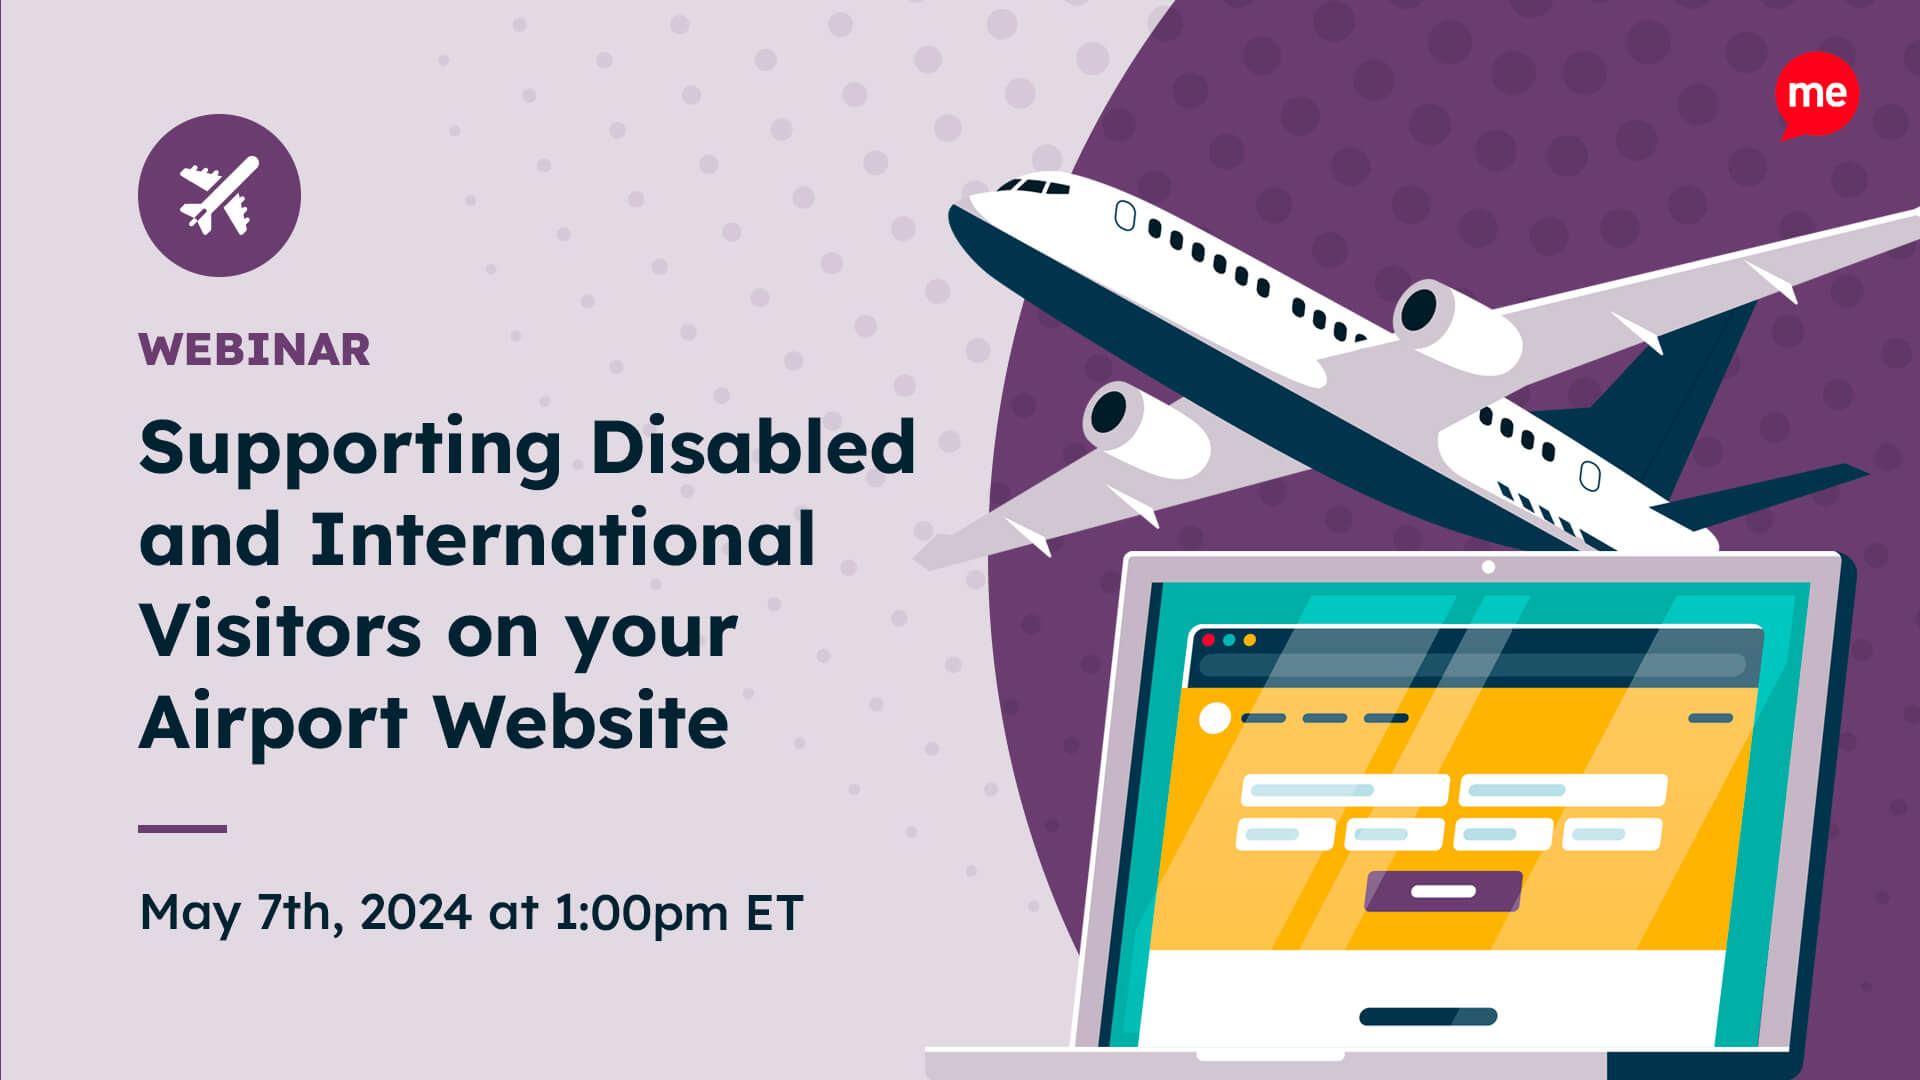 Supporting Disabled and International Visitors on Your Airport Website